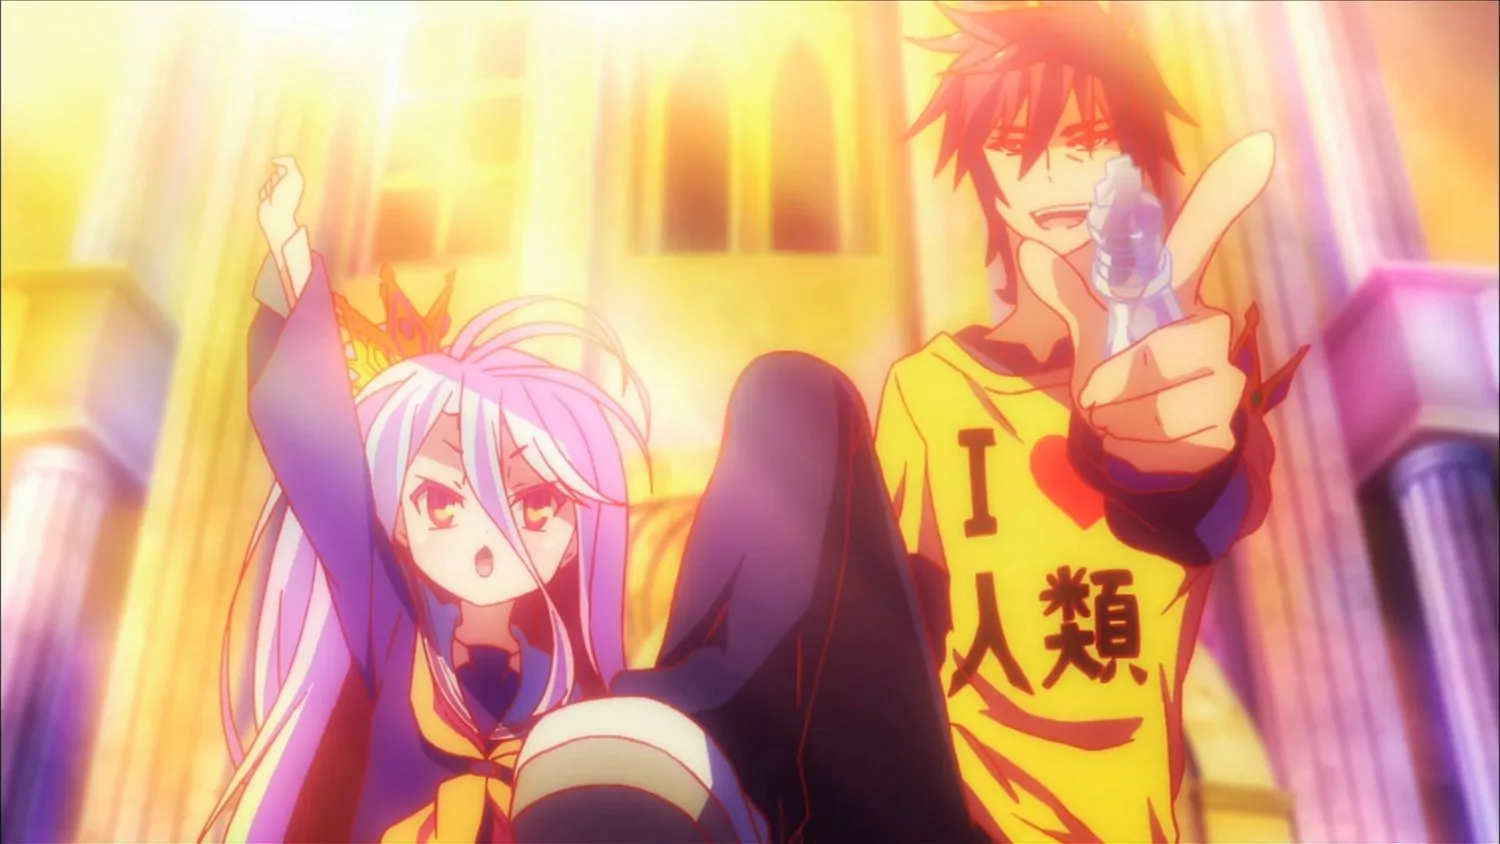 No Game No Life Season 2 - Updates On Release Date, Cast, And More (July 2021) 